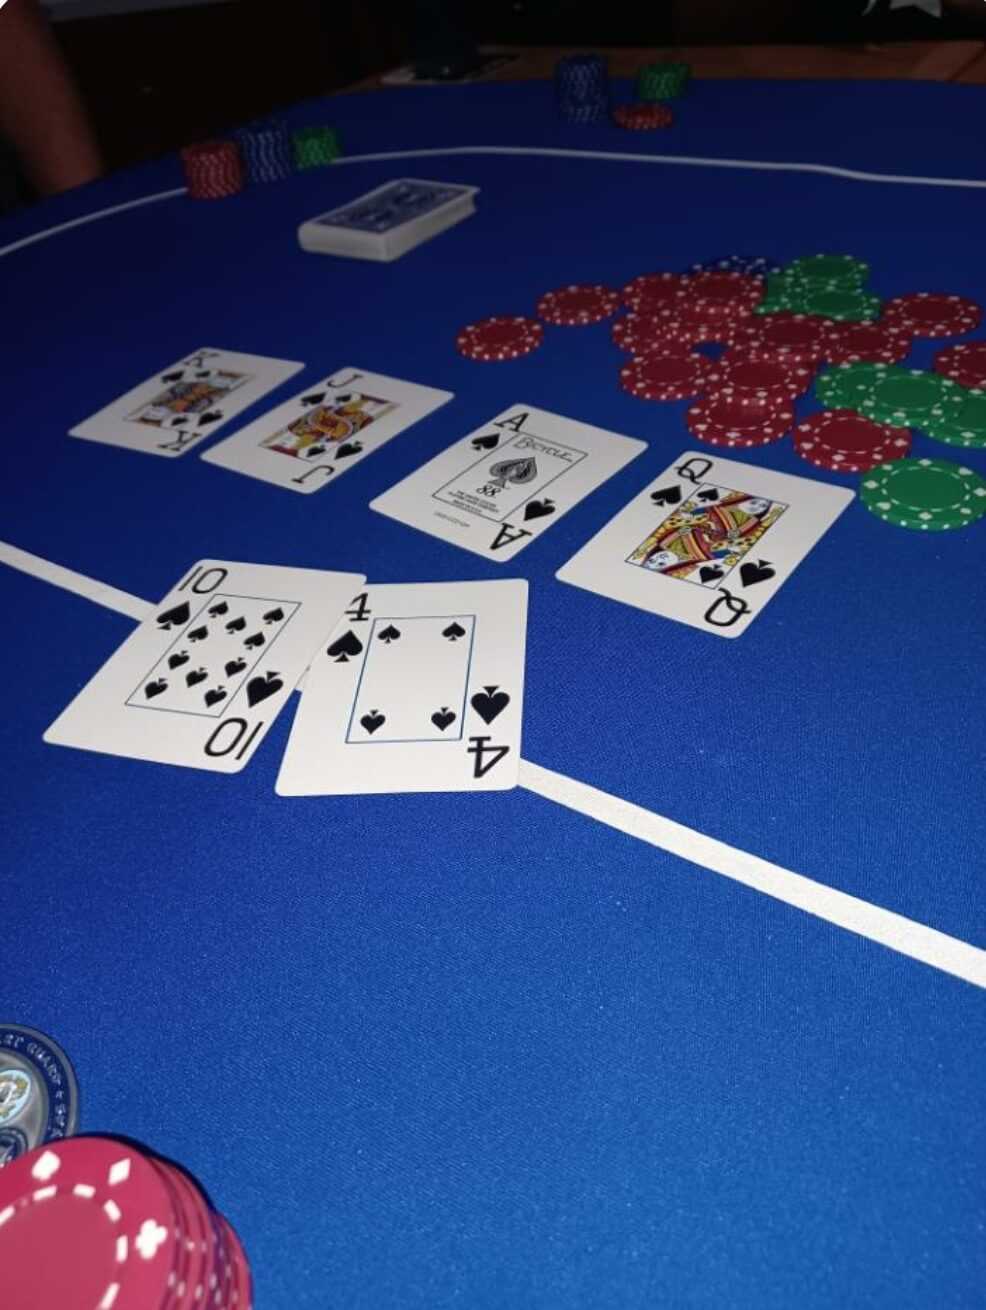 Cards and chips on a playing table